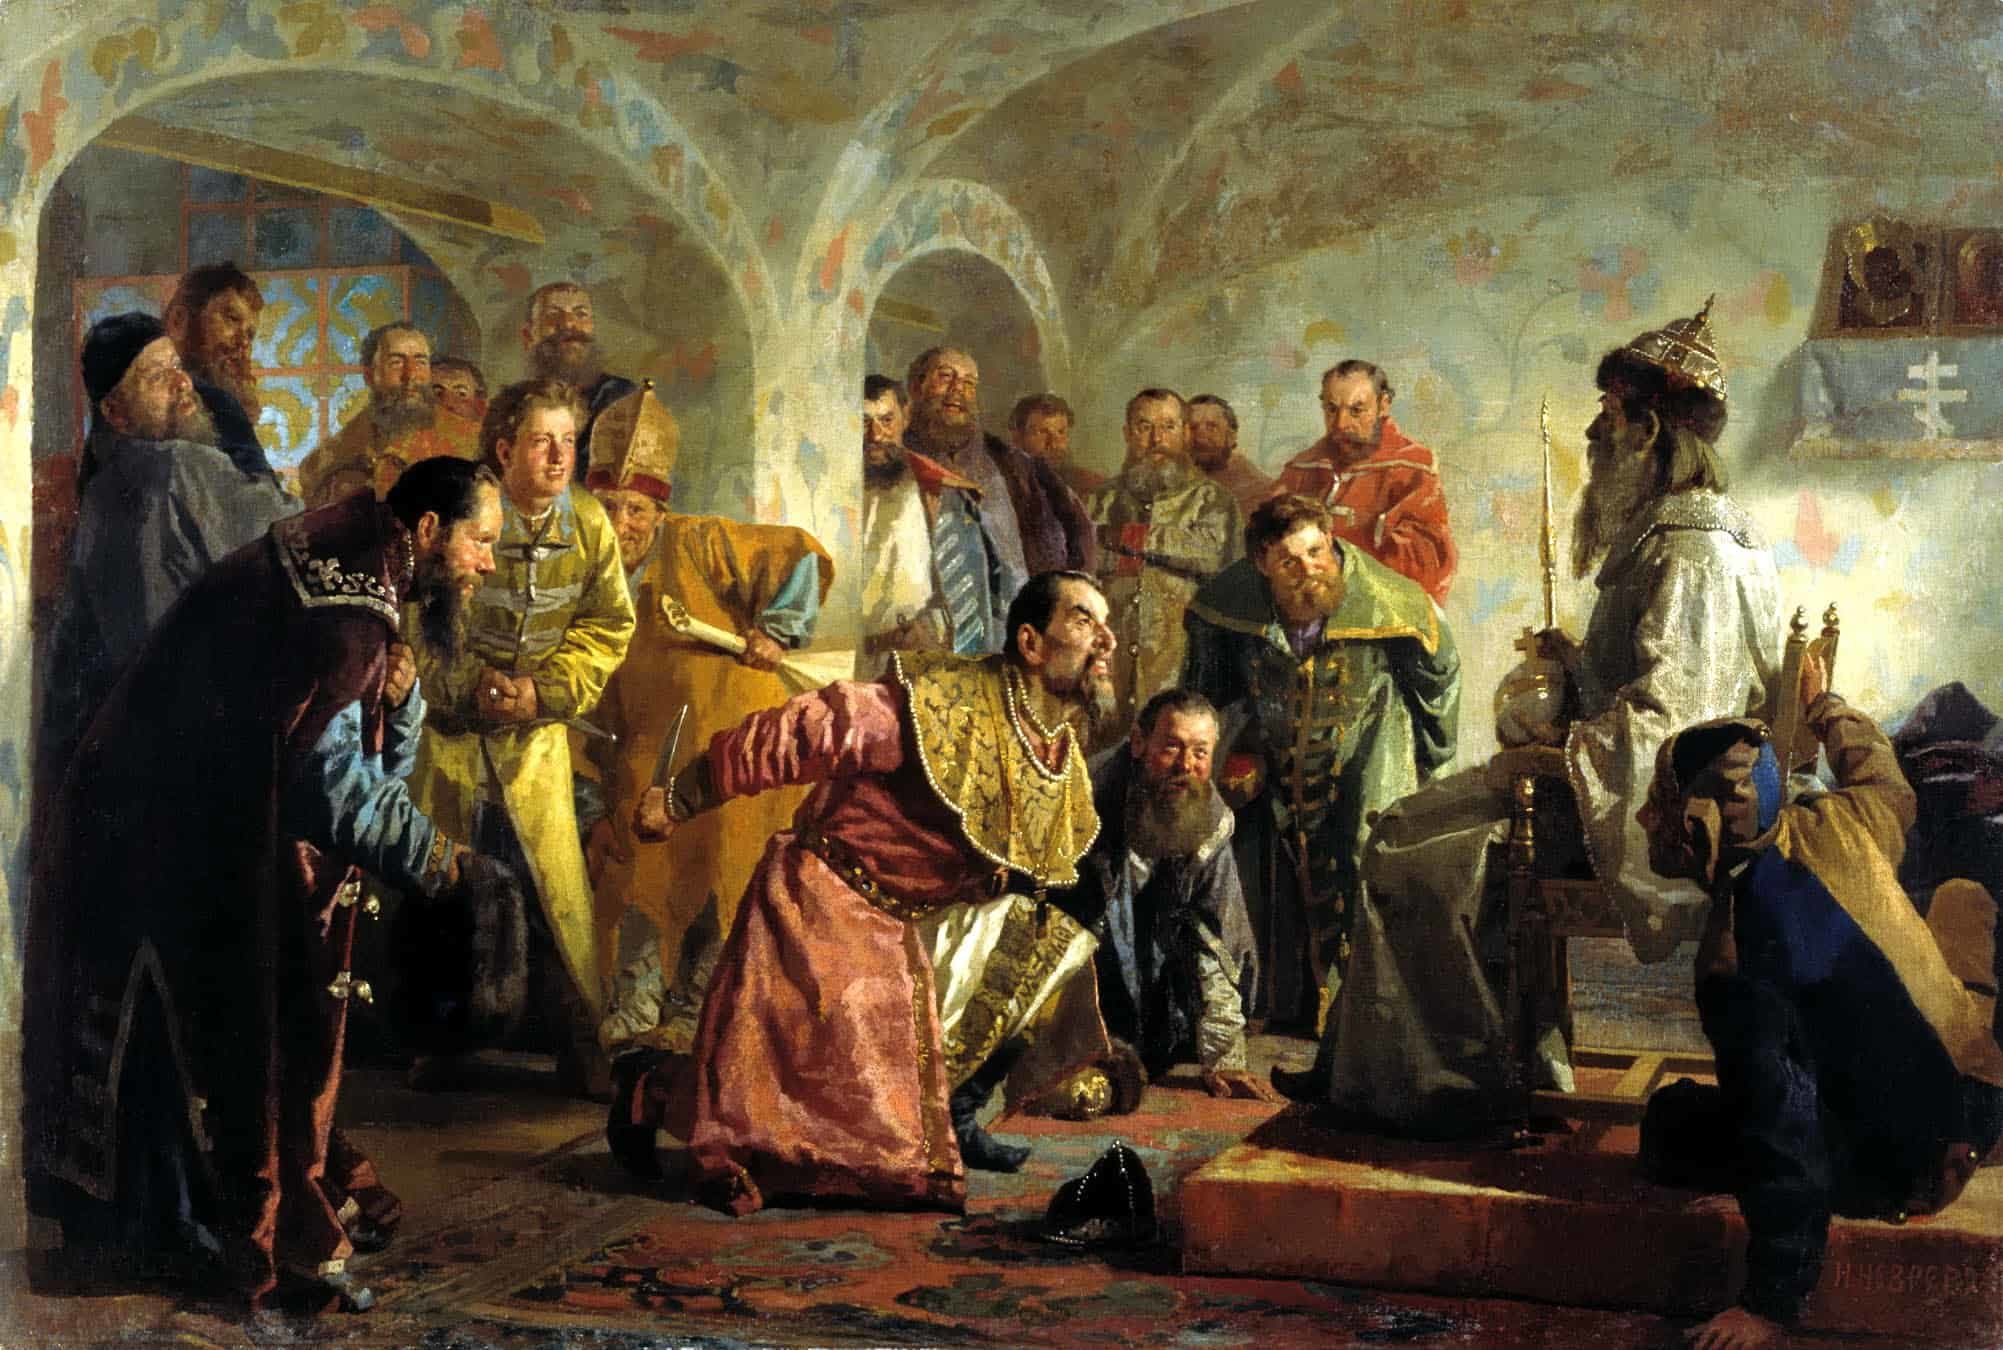 A depiction of Ivan the Terrible and the Oprichniki punishing someone